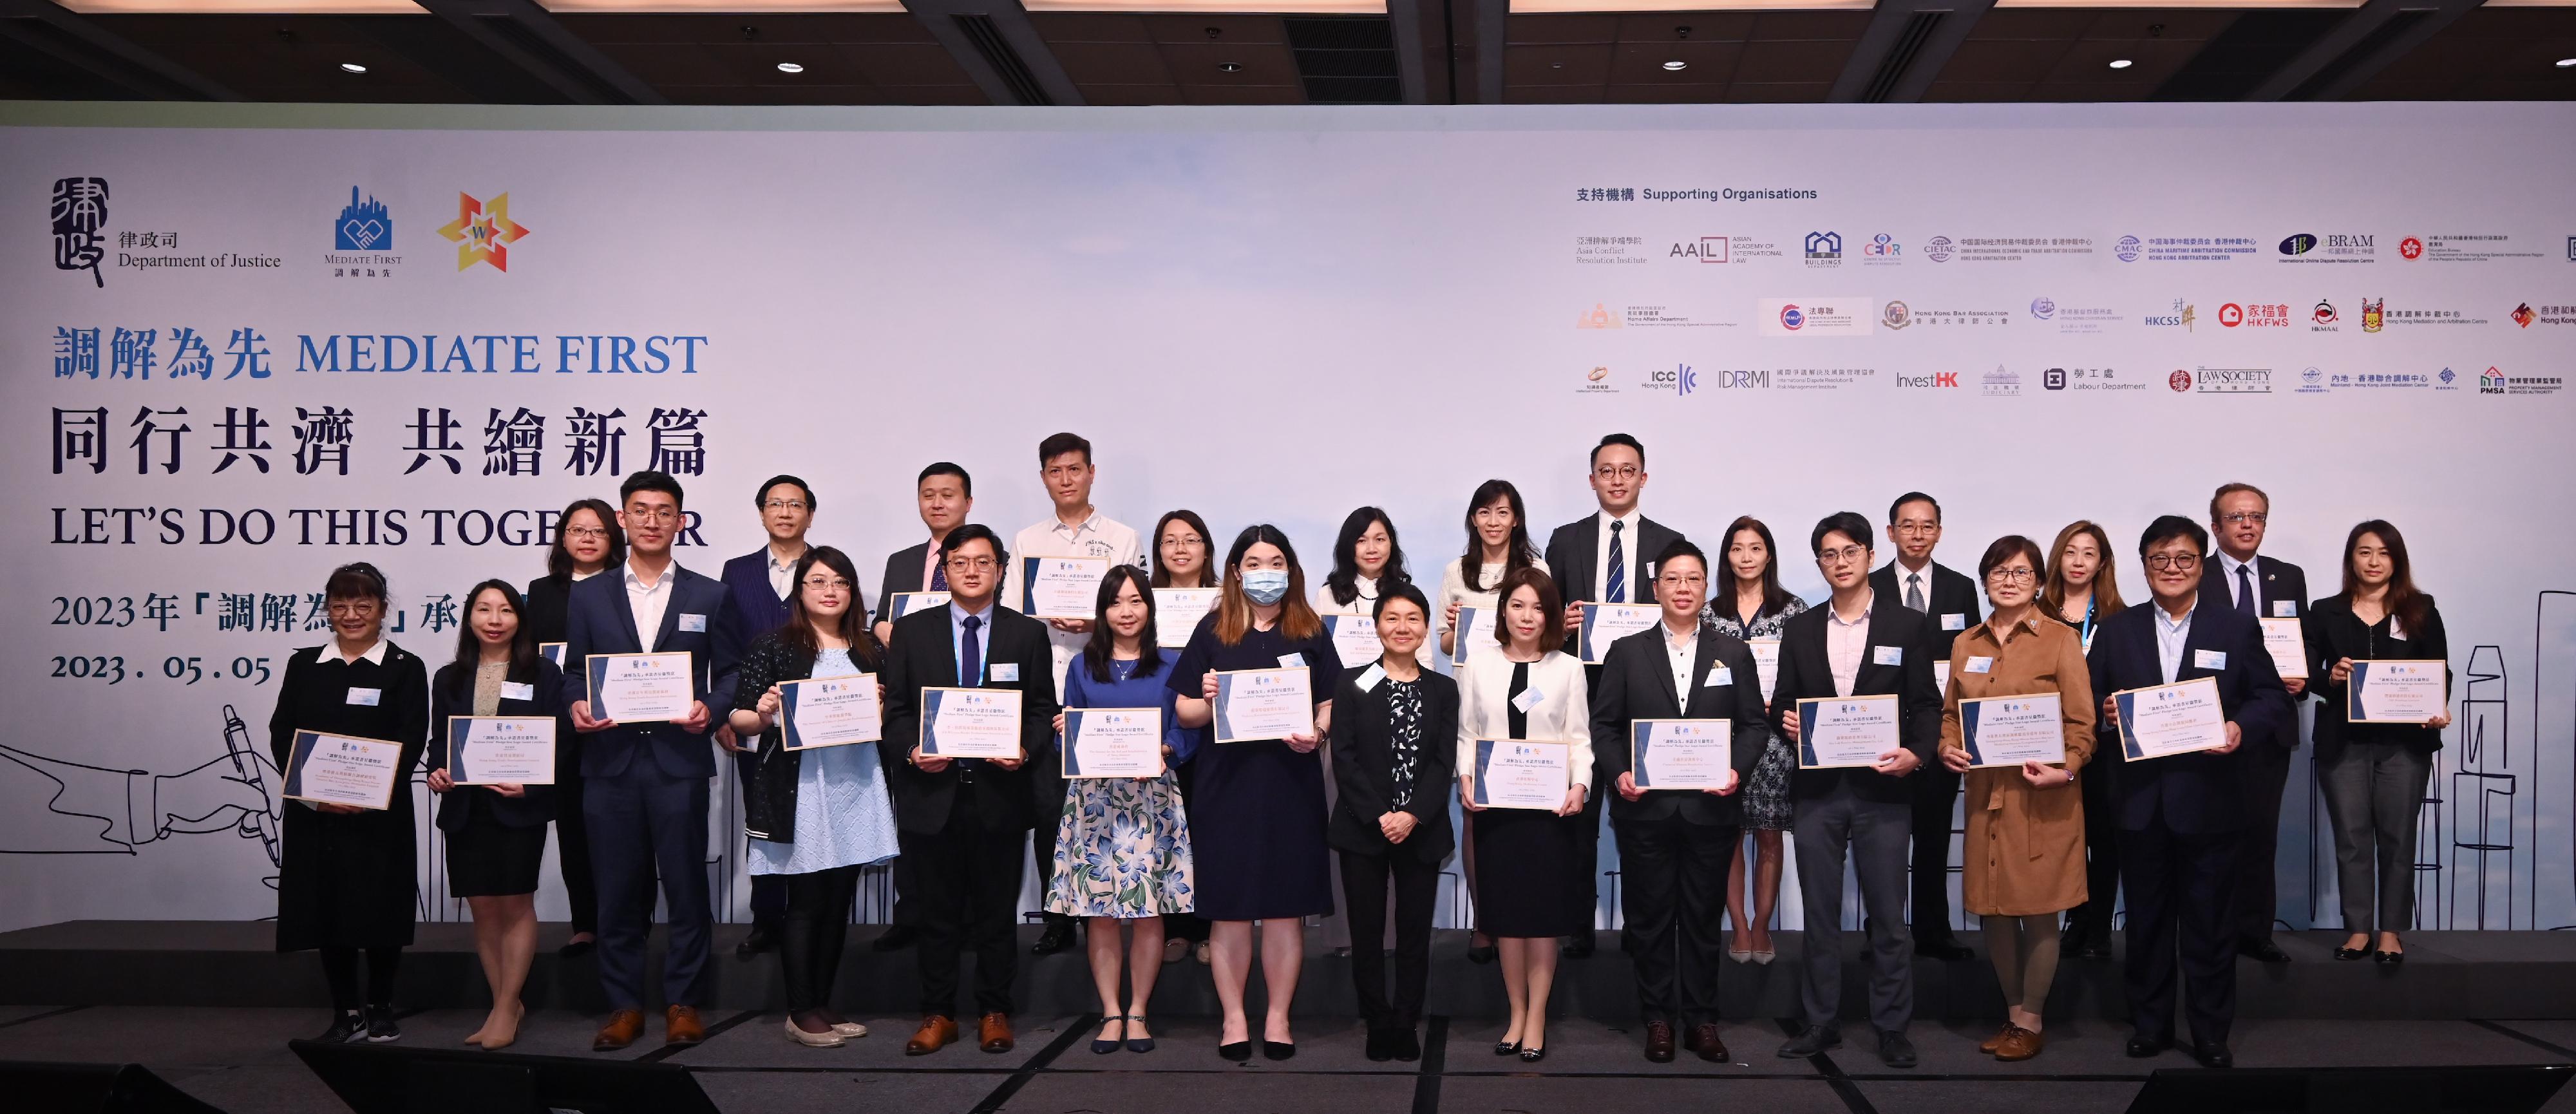 The biennial "Mediate First" Pledge Event organised by the Department of Justice (DoJ) was held today (May 5). Photo shows the Law Officer (Civil Law) of the DoJ, Ms Christina Cheung (front row, sixth right), presenting awards at the Star Logo Award Presentation Ceremony.
